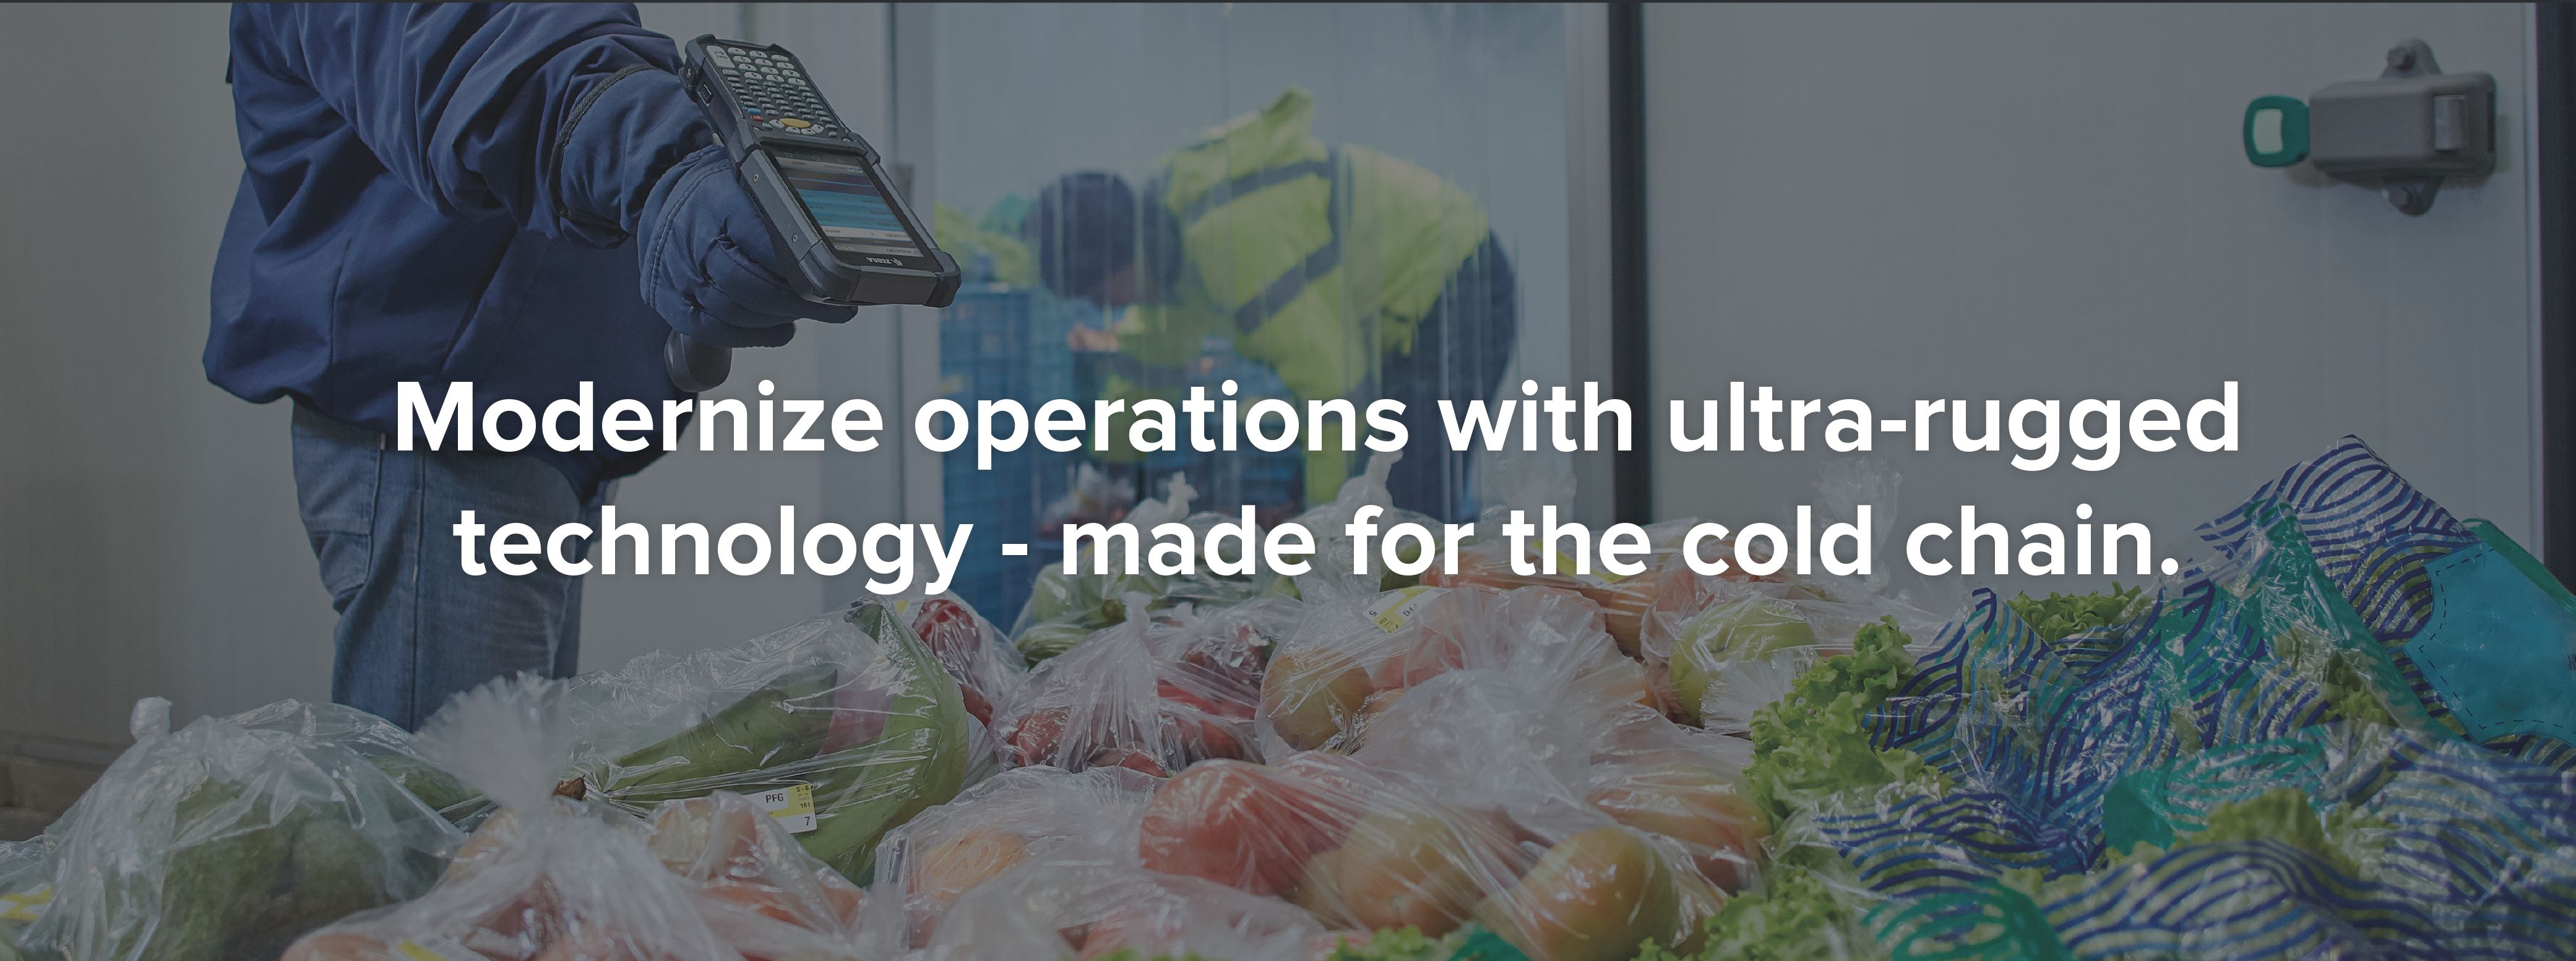 Modernize operations with ultra-rugged technology - made for the cold chain. 